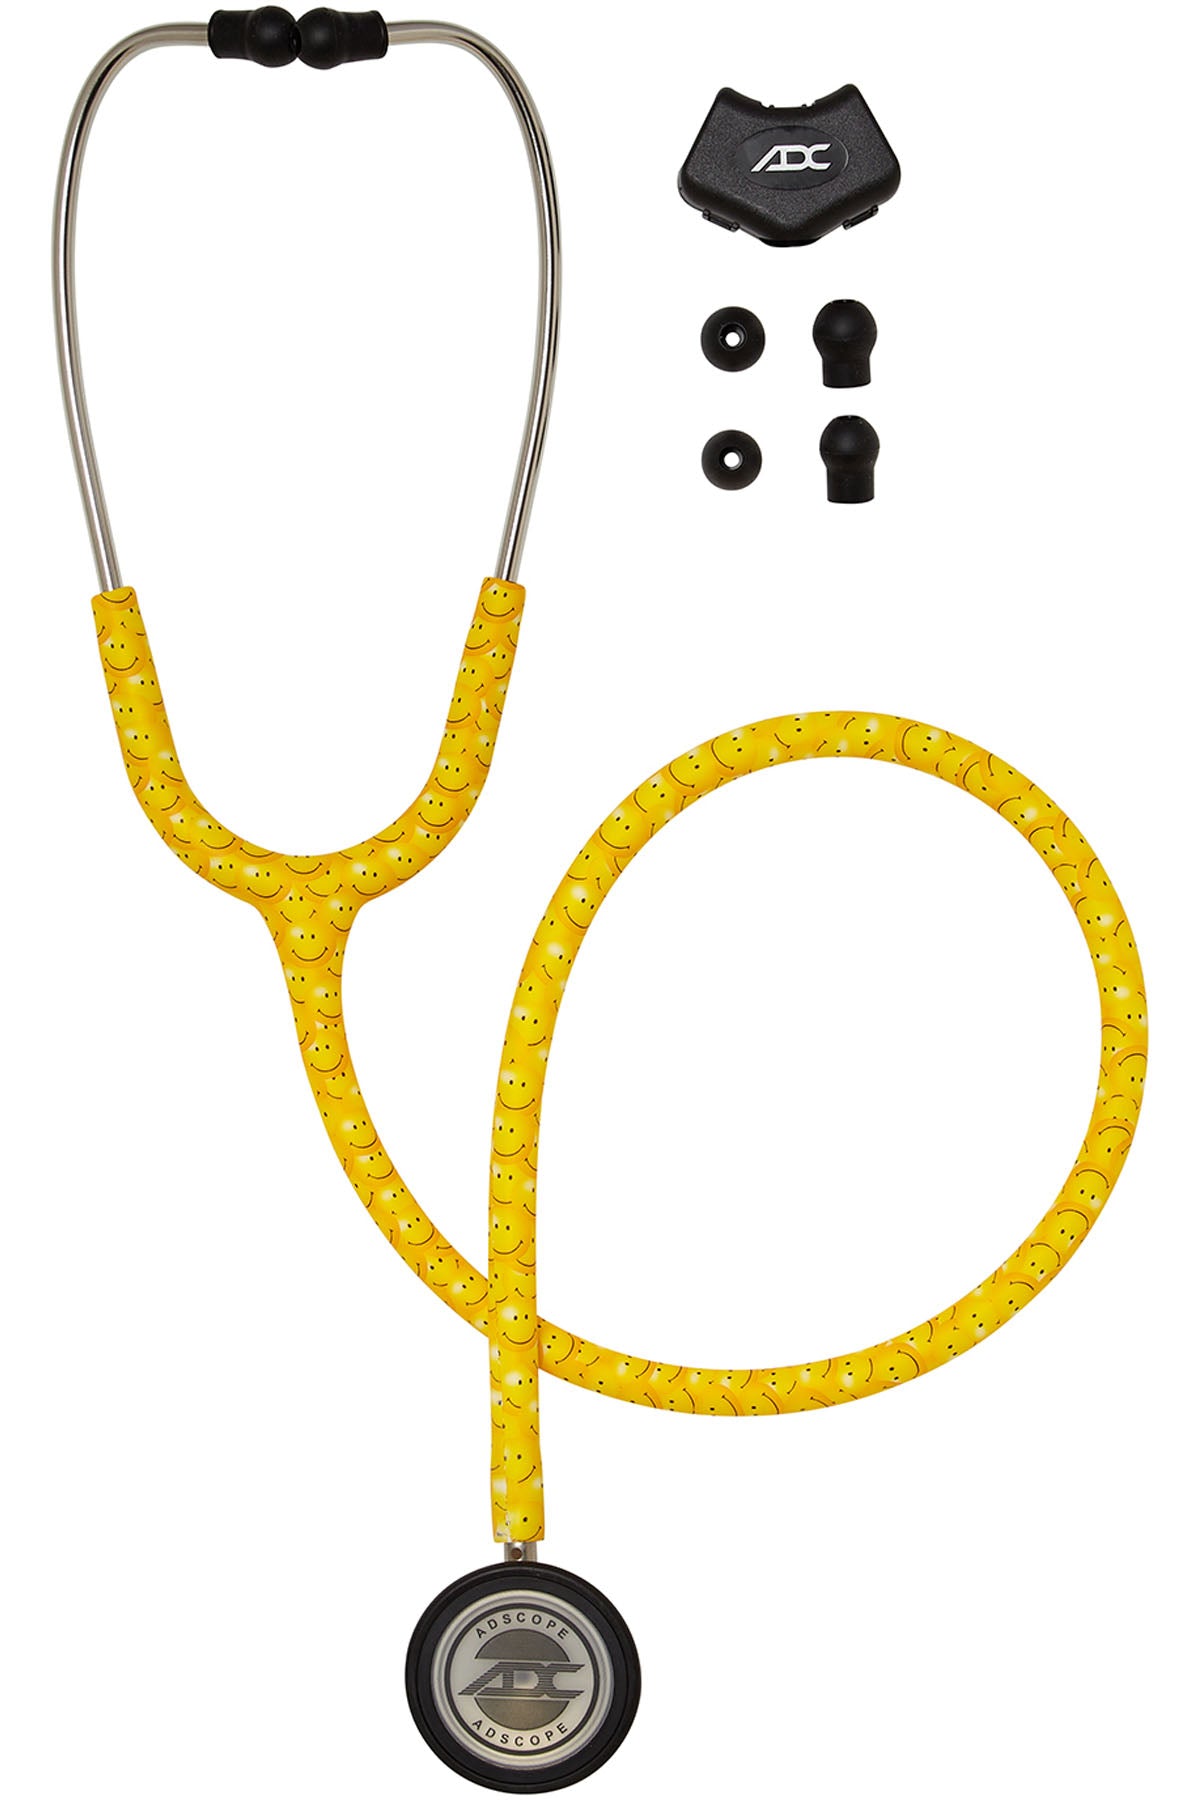 Adscope 603 Clinician Stethoscope - Special Print Stethoscope American Diagnostic Happiness  